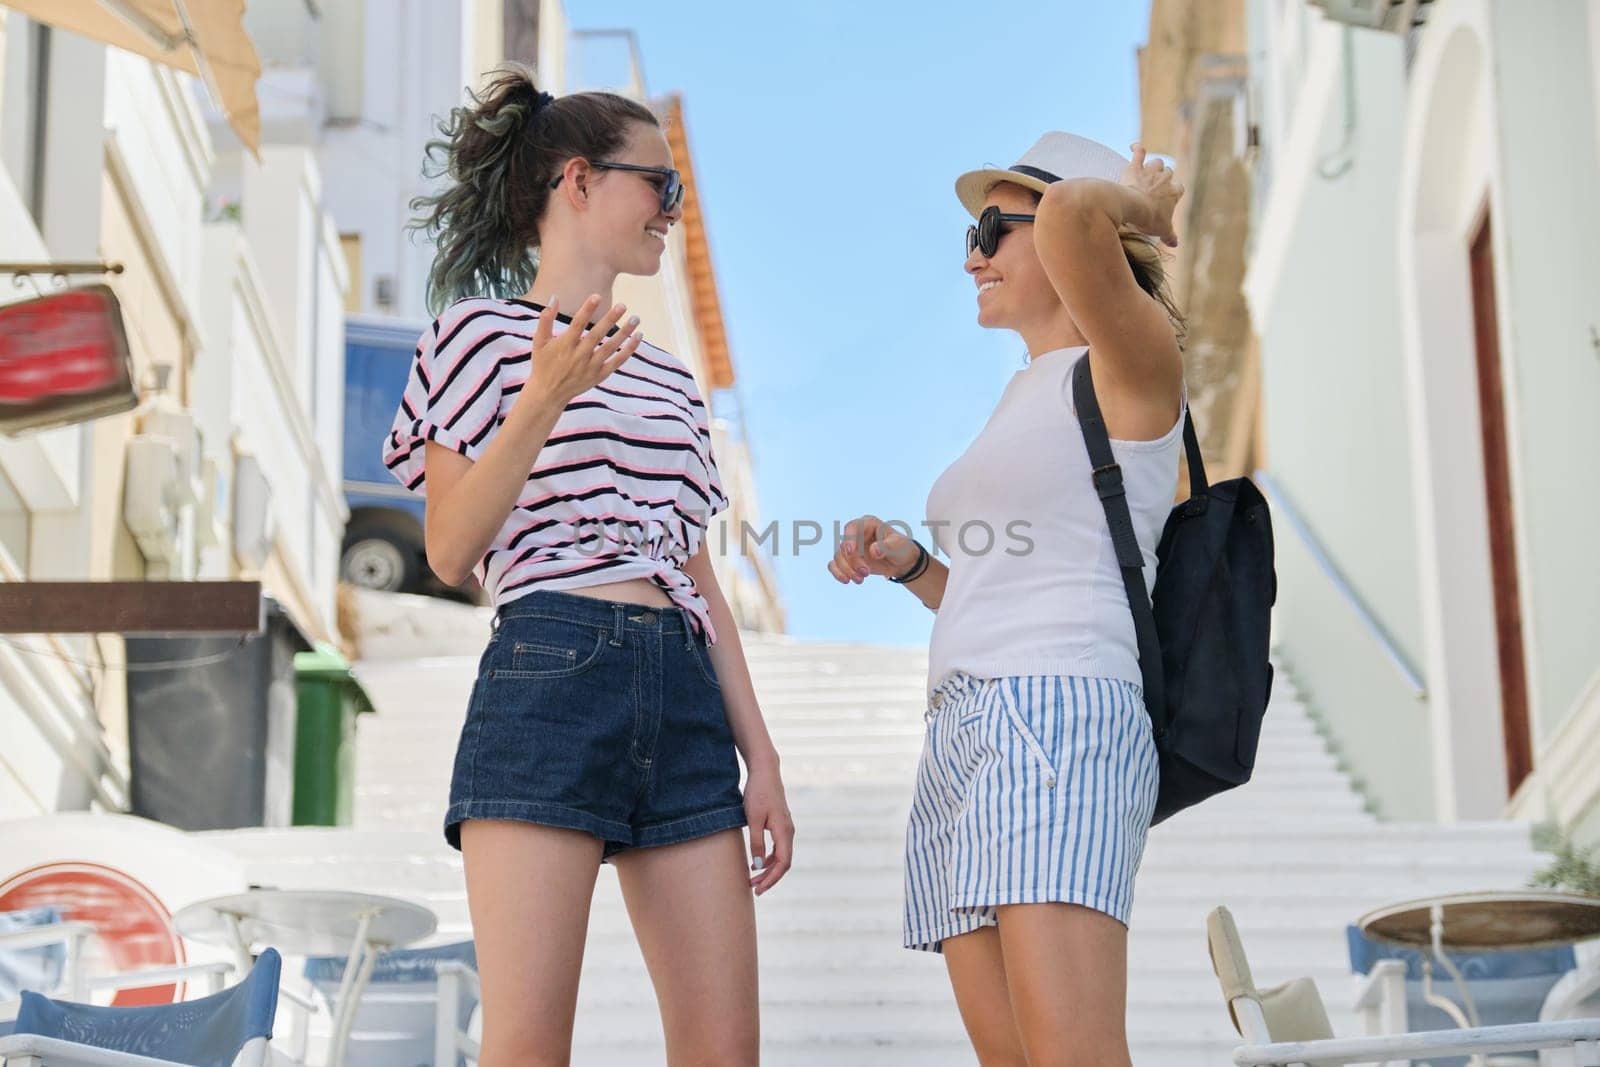 Portrait of mother and teenage daughter talking and smiling, summer city resort background white staircase